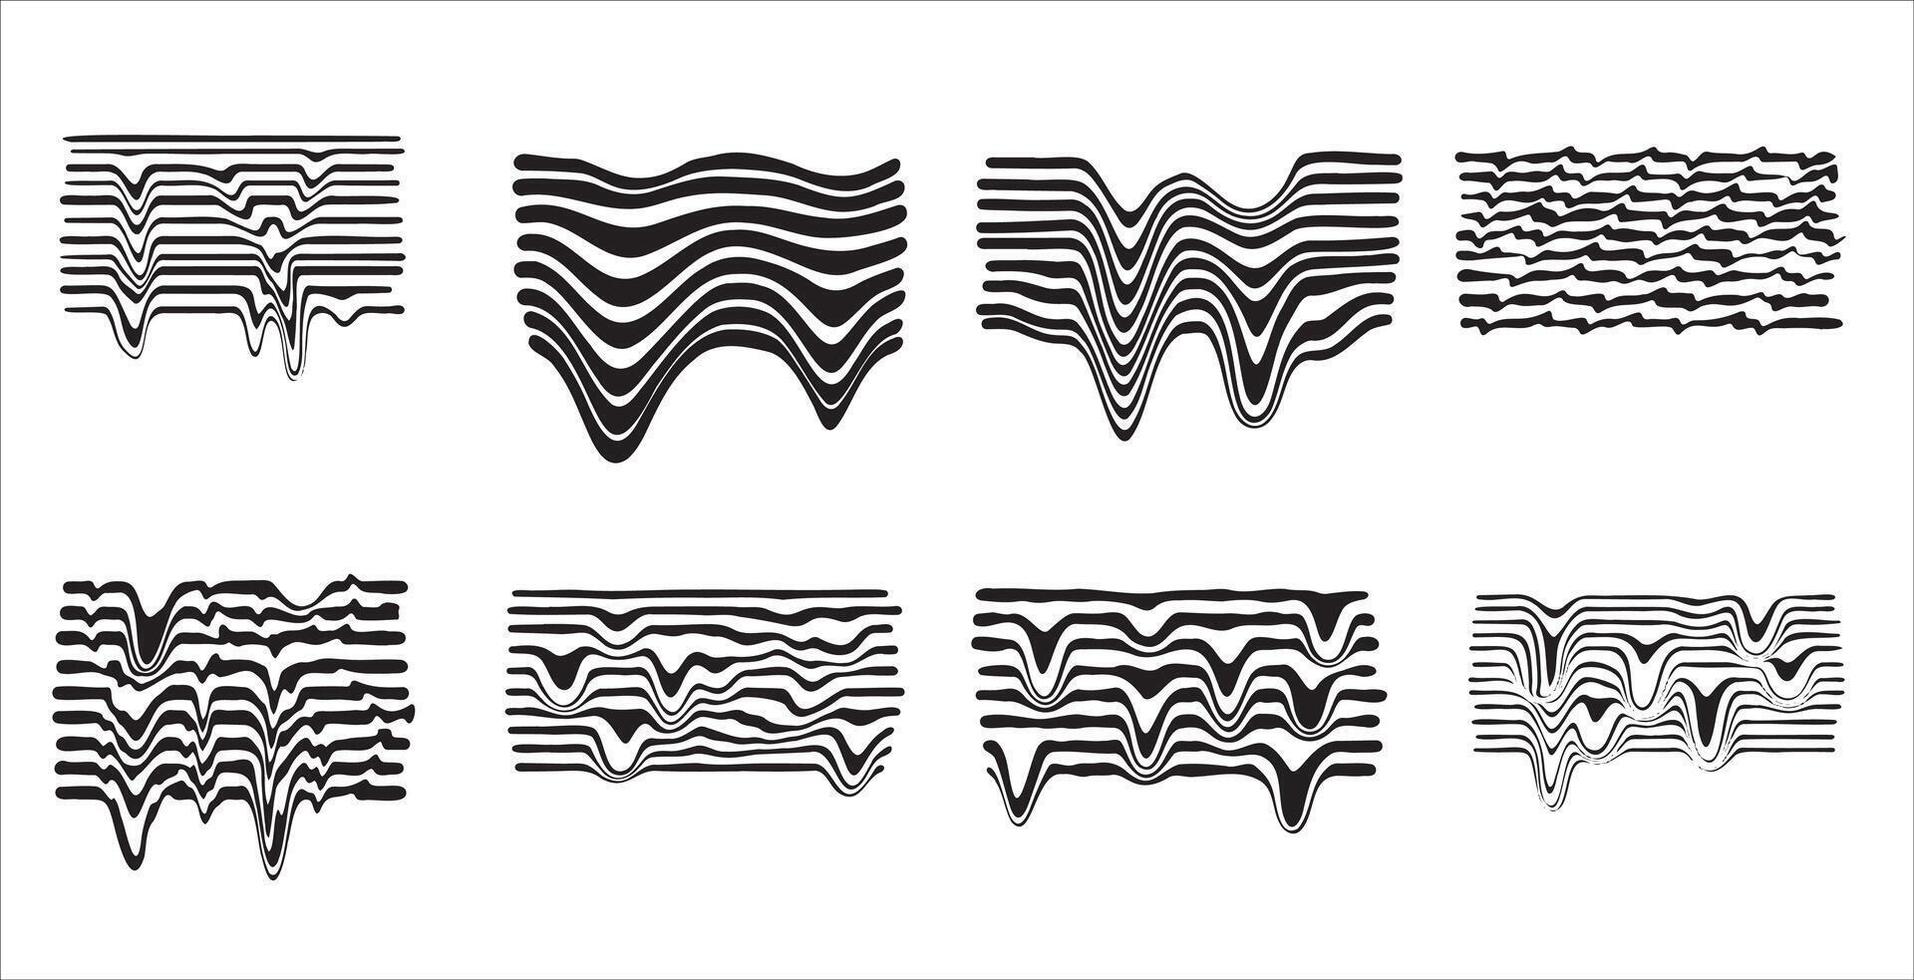 Distortion line. Black glitch minimal texture. Modern abstract distorted pattern. Creative dynamic effect collection on white. Set of geometric wavy stripe vector